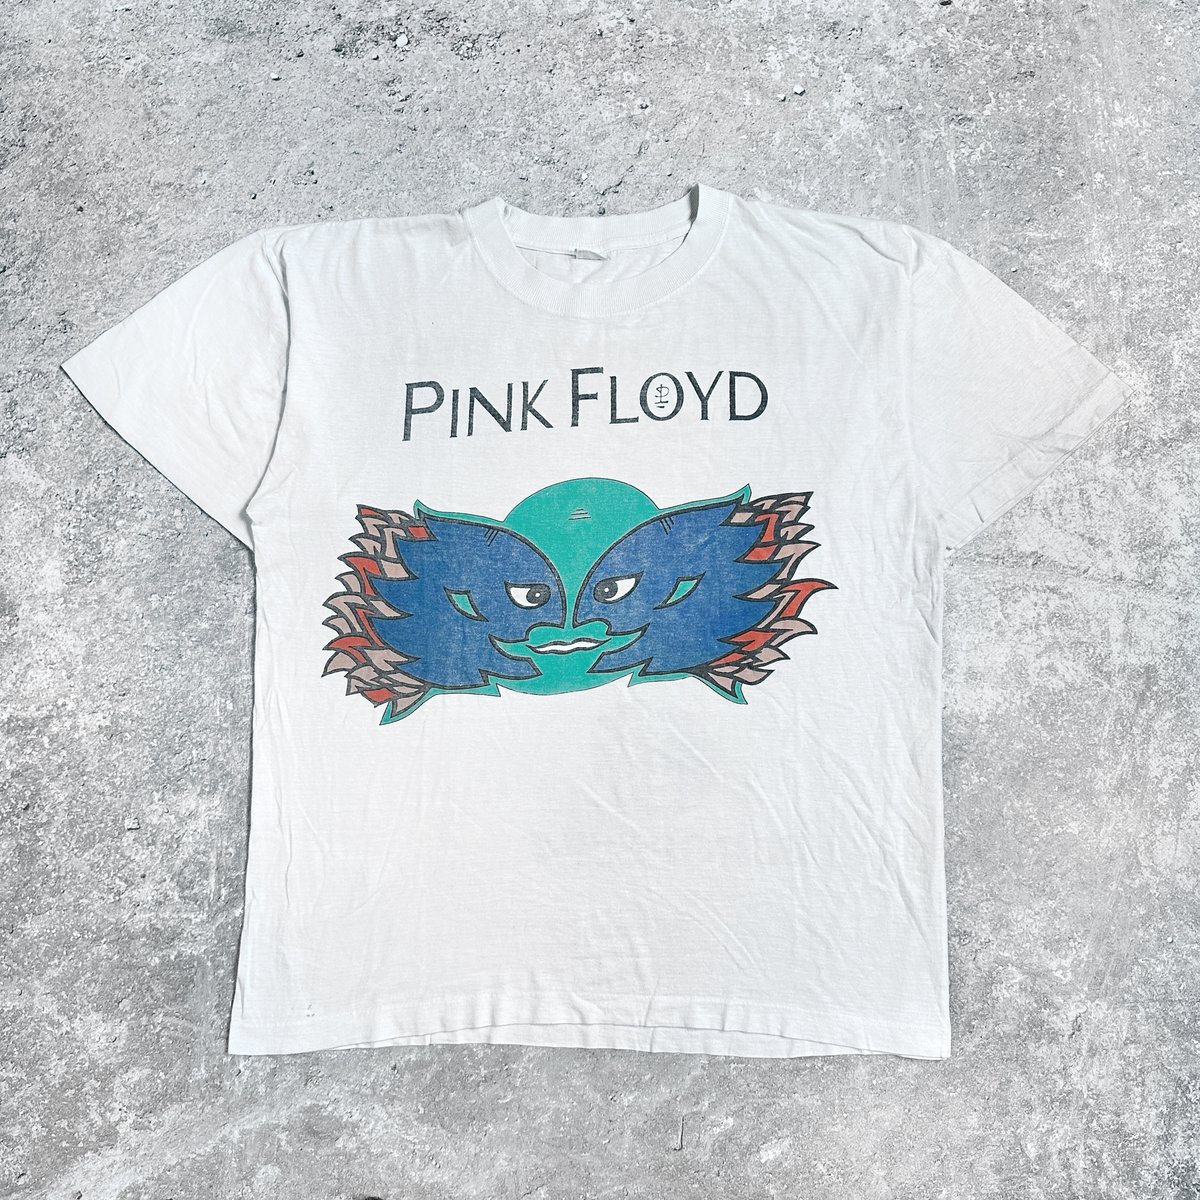 Pink Floyd 1994 'Division Bell' White T-Shirt | NLVintage